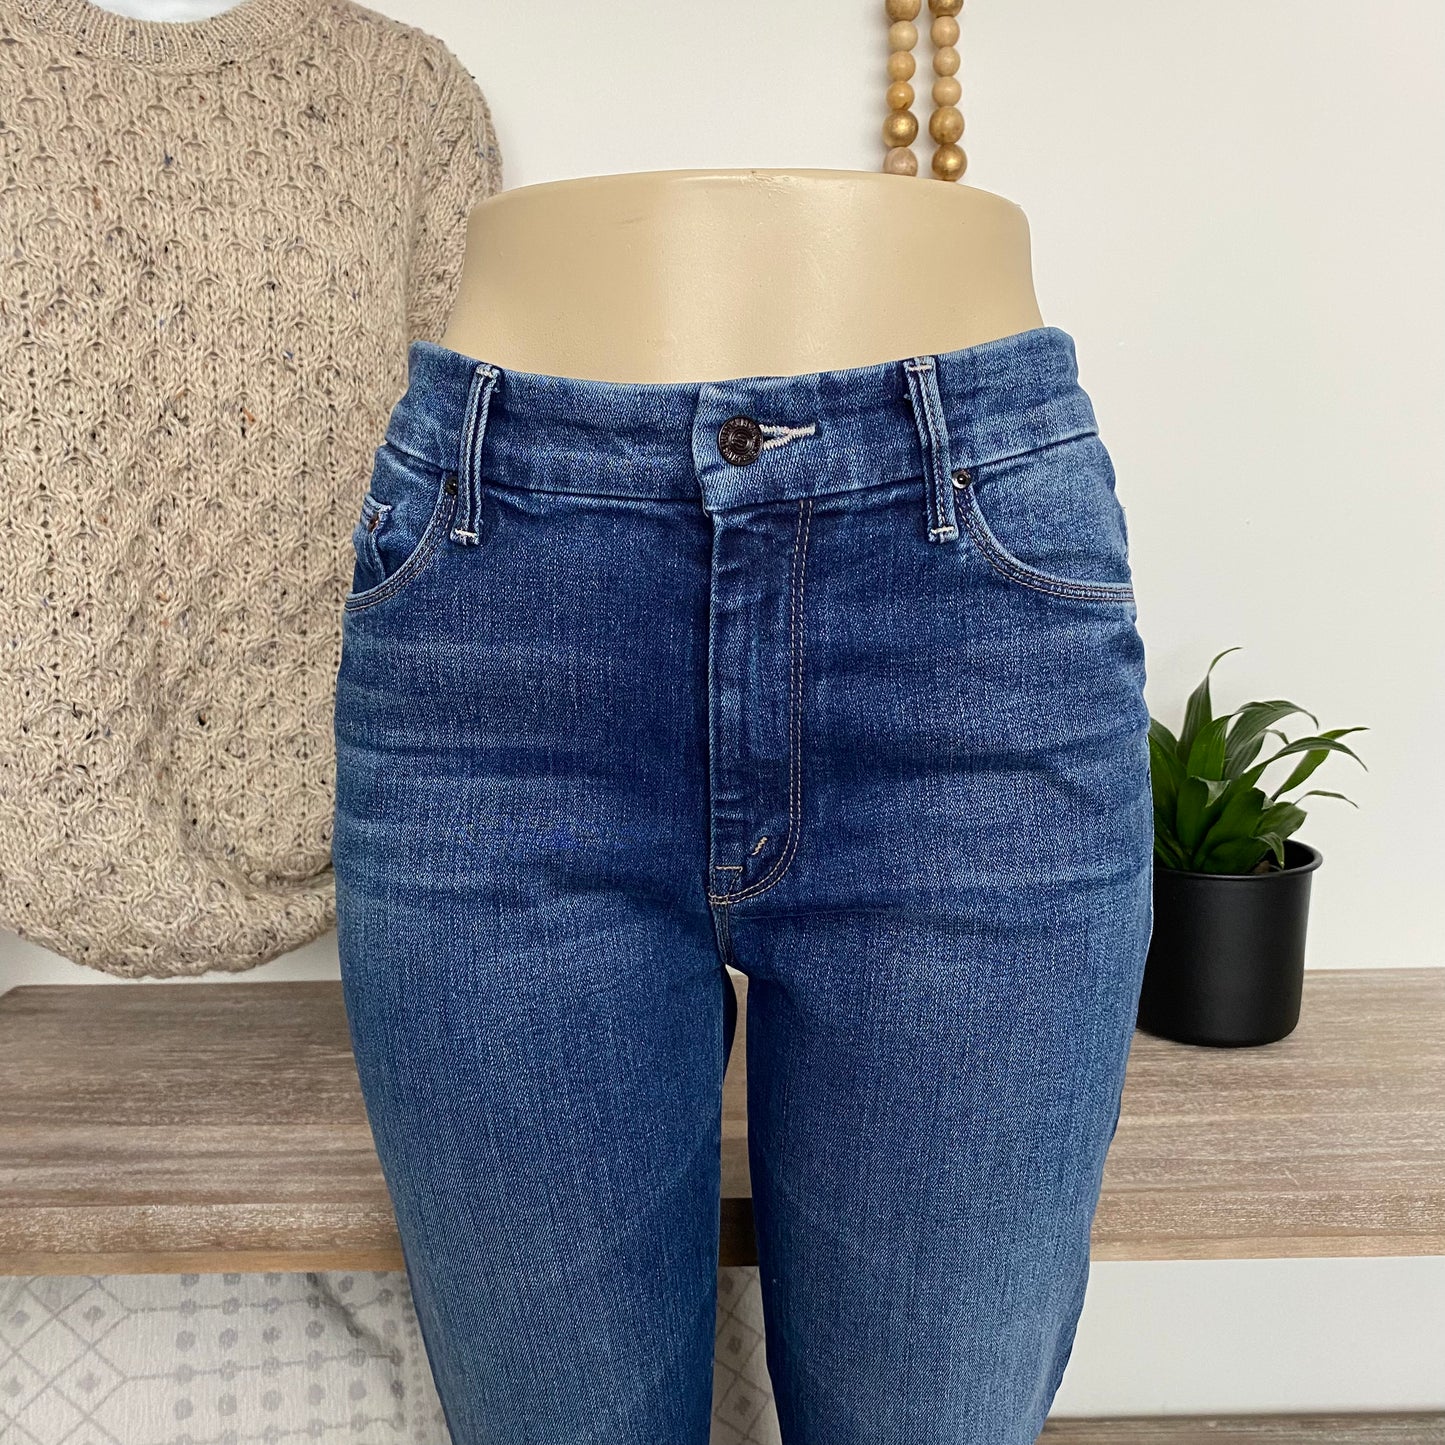 MOTHER High Waisted Looker Ankle Fray Jeans Size 29